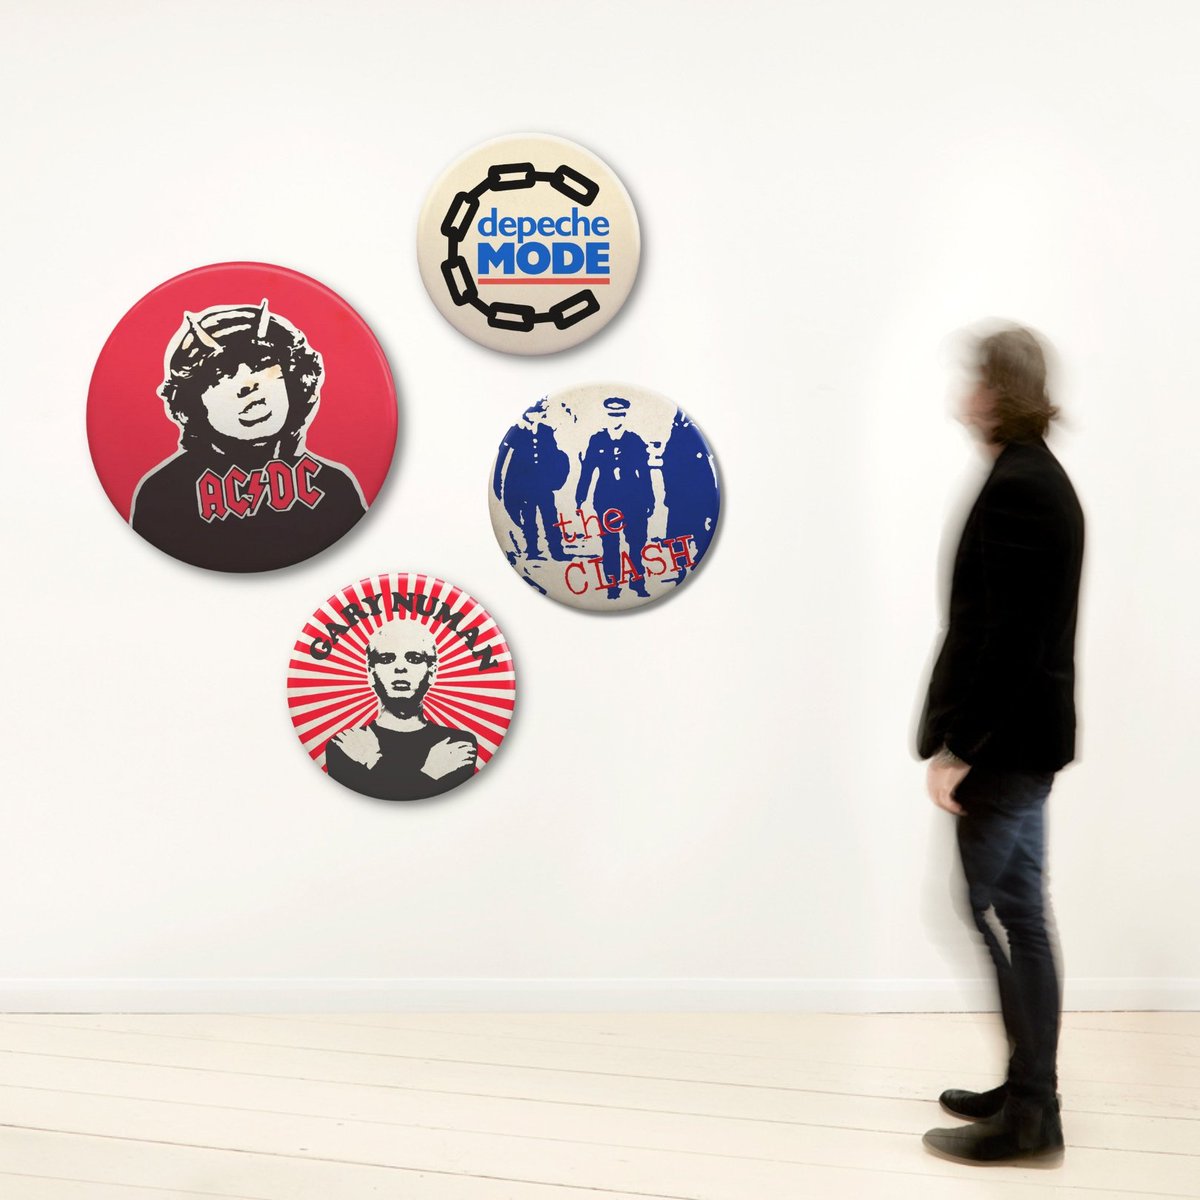 Show-stopping works celebrating iconic bands across rock, pop, punk & more by Tony Dennis AKA TapeDeck Art. ⁠ Email us for details on price and availability 📧 info@boxgalleries.com ⁠ #boxgalleries #tapedeck #acdc #depechemode #rockandroll #rockandrollhalloffame #londonart